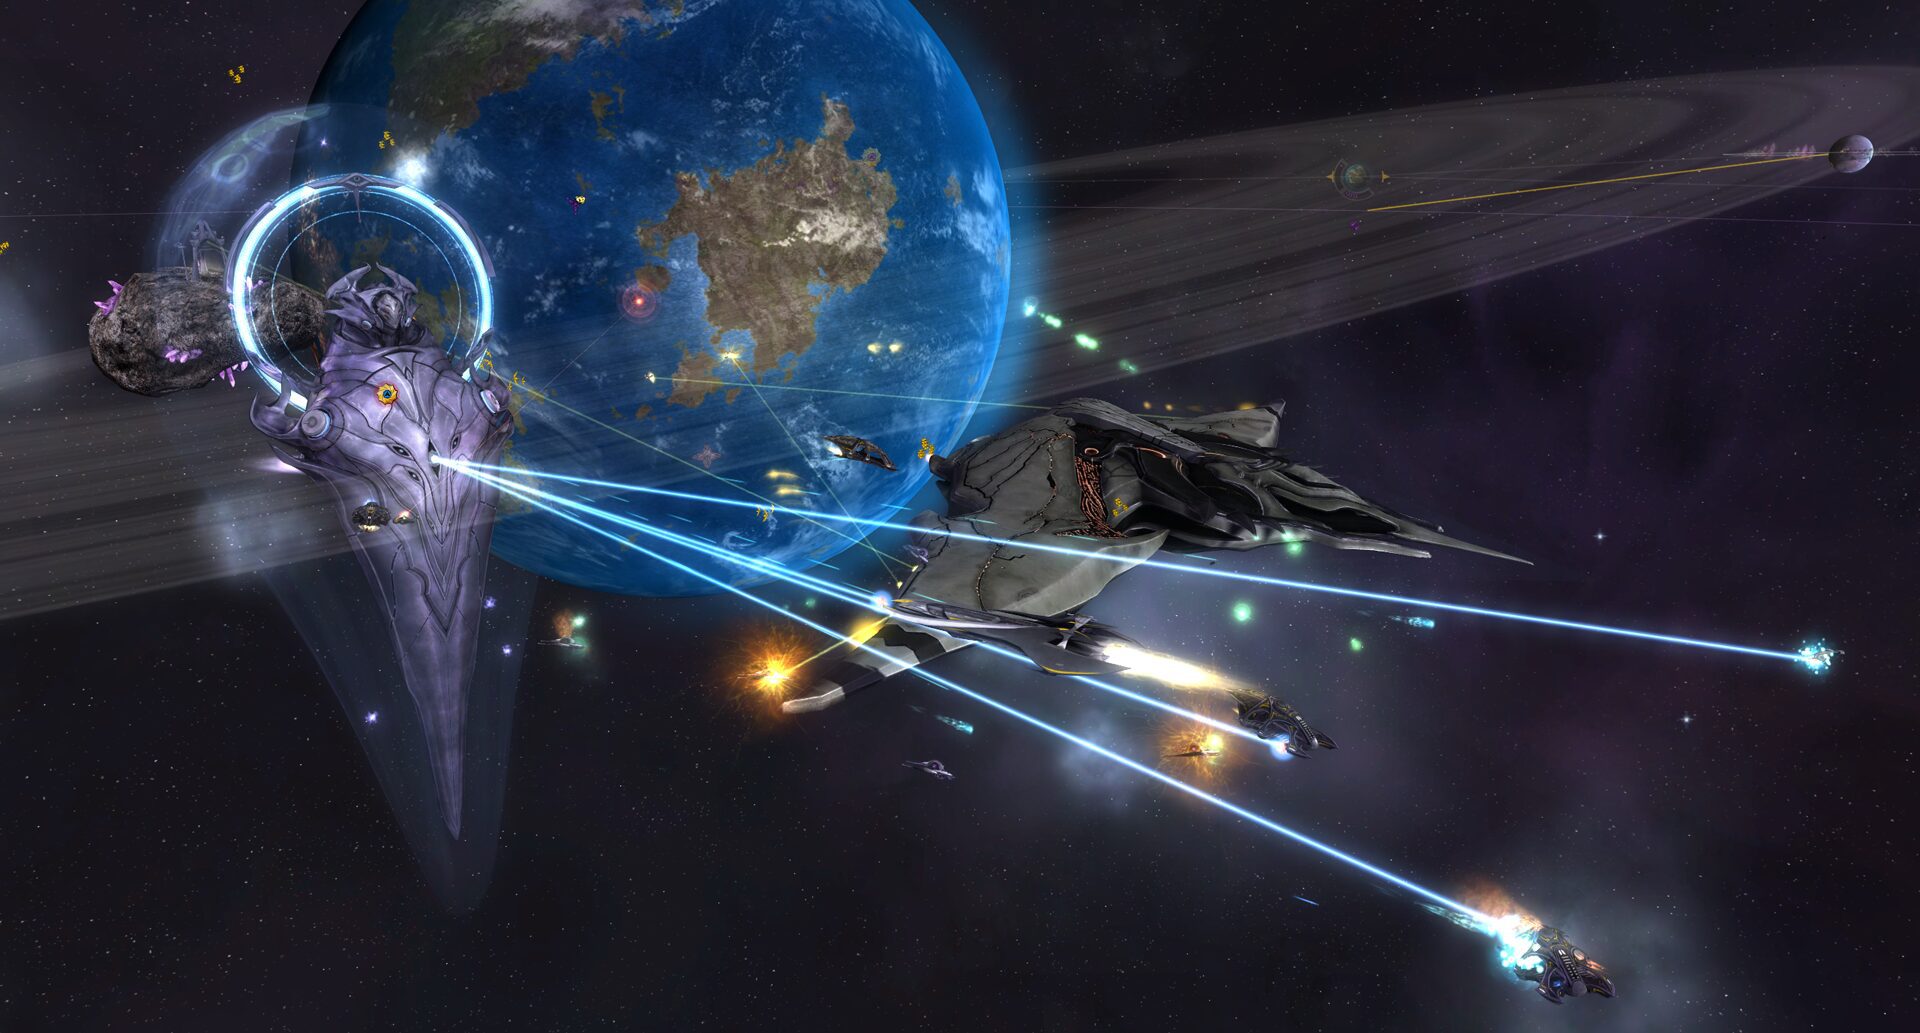 Sins of a Solar Empire: Rebellion is free for limited time